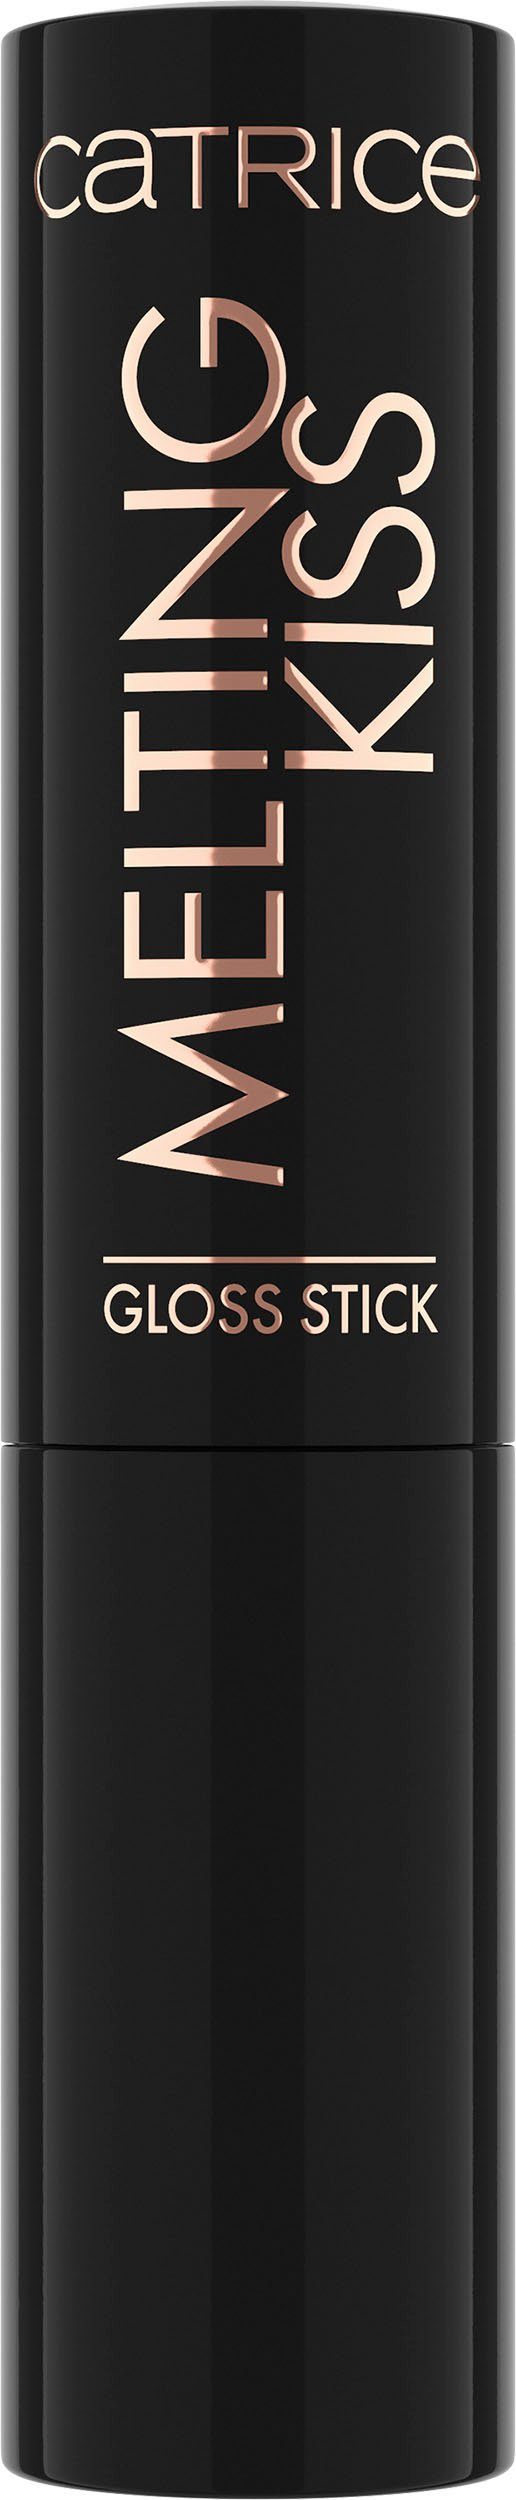 Lippenstift connection Kiss strong Gloss Catrice Stick, Catrice Melting 3-tlg.